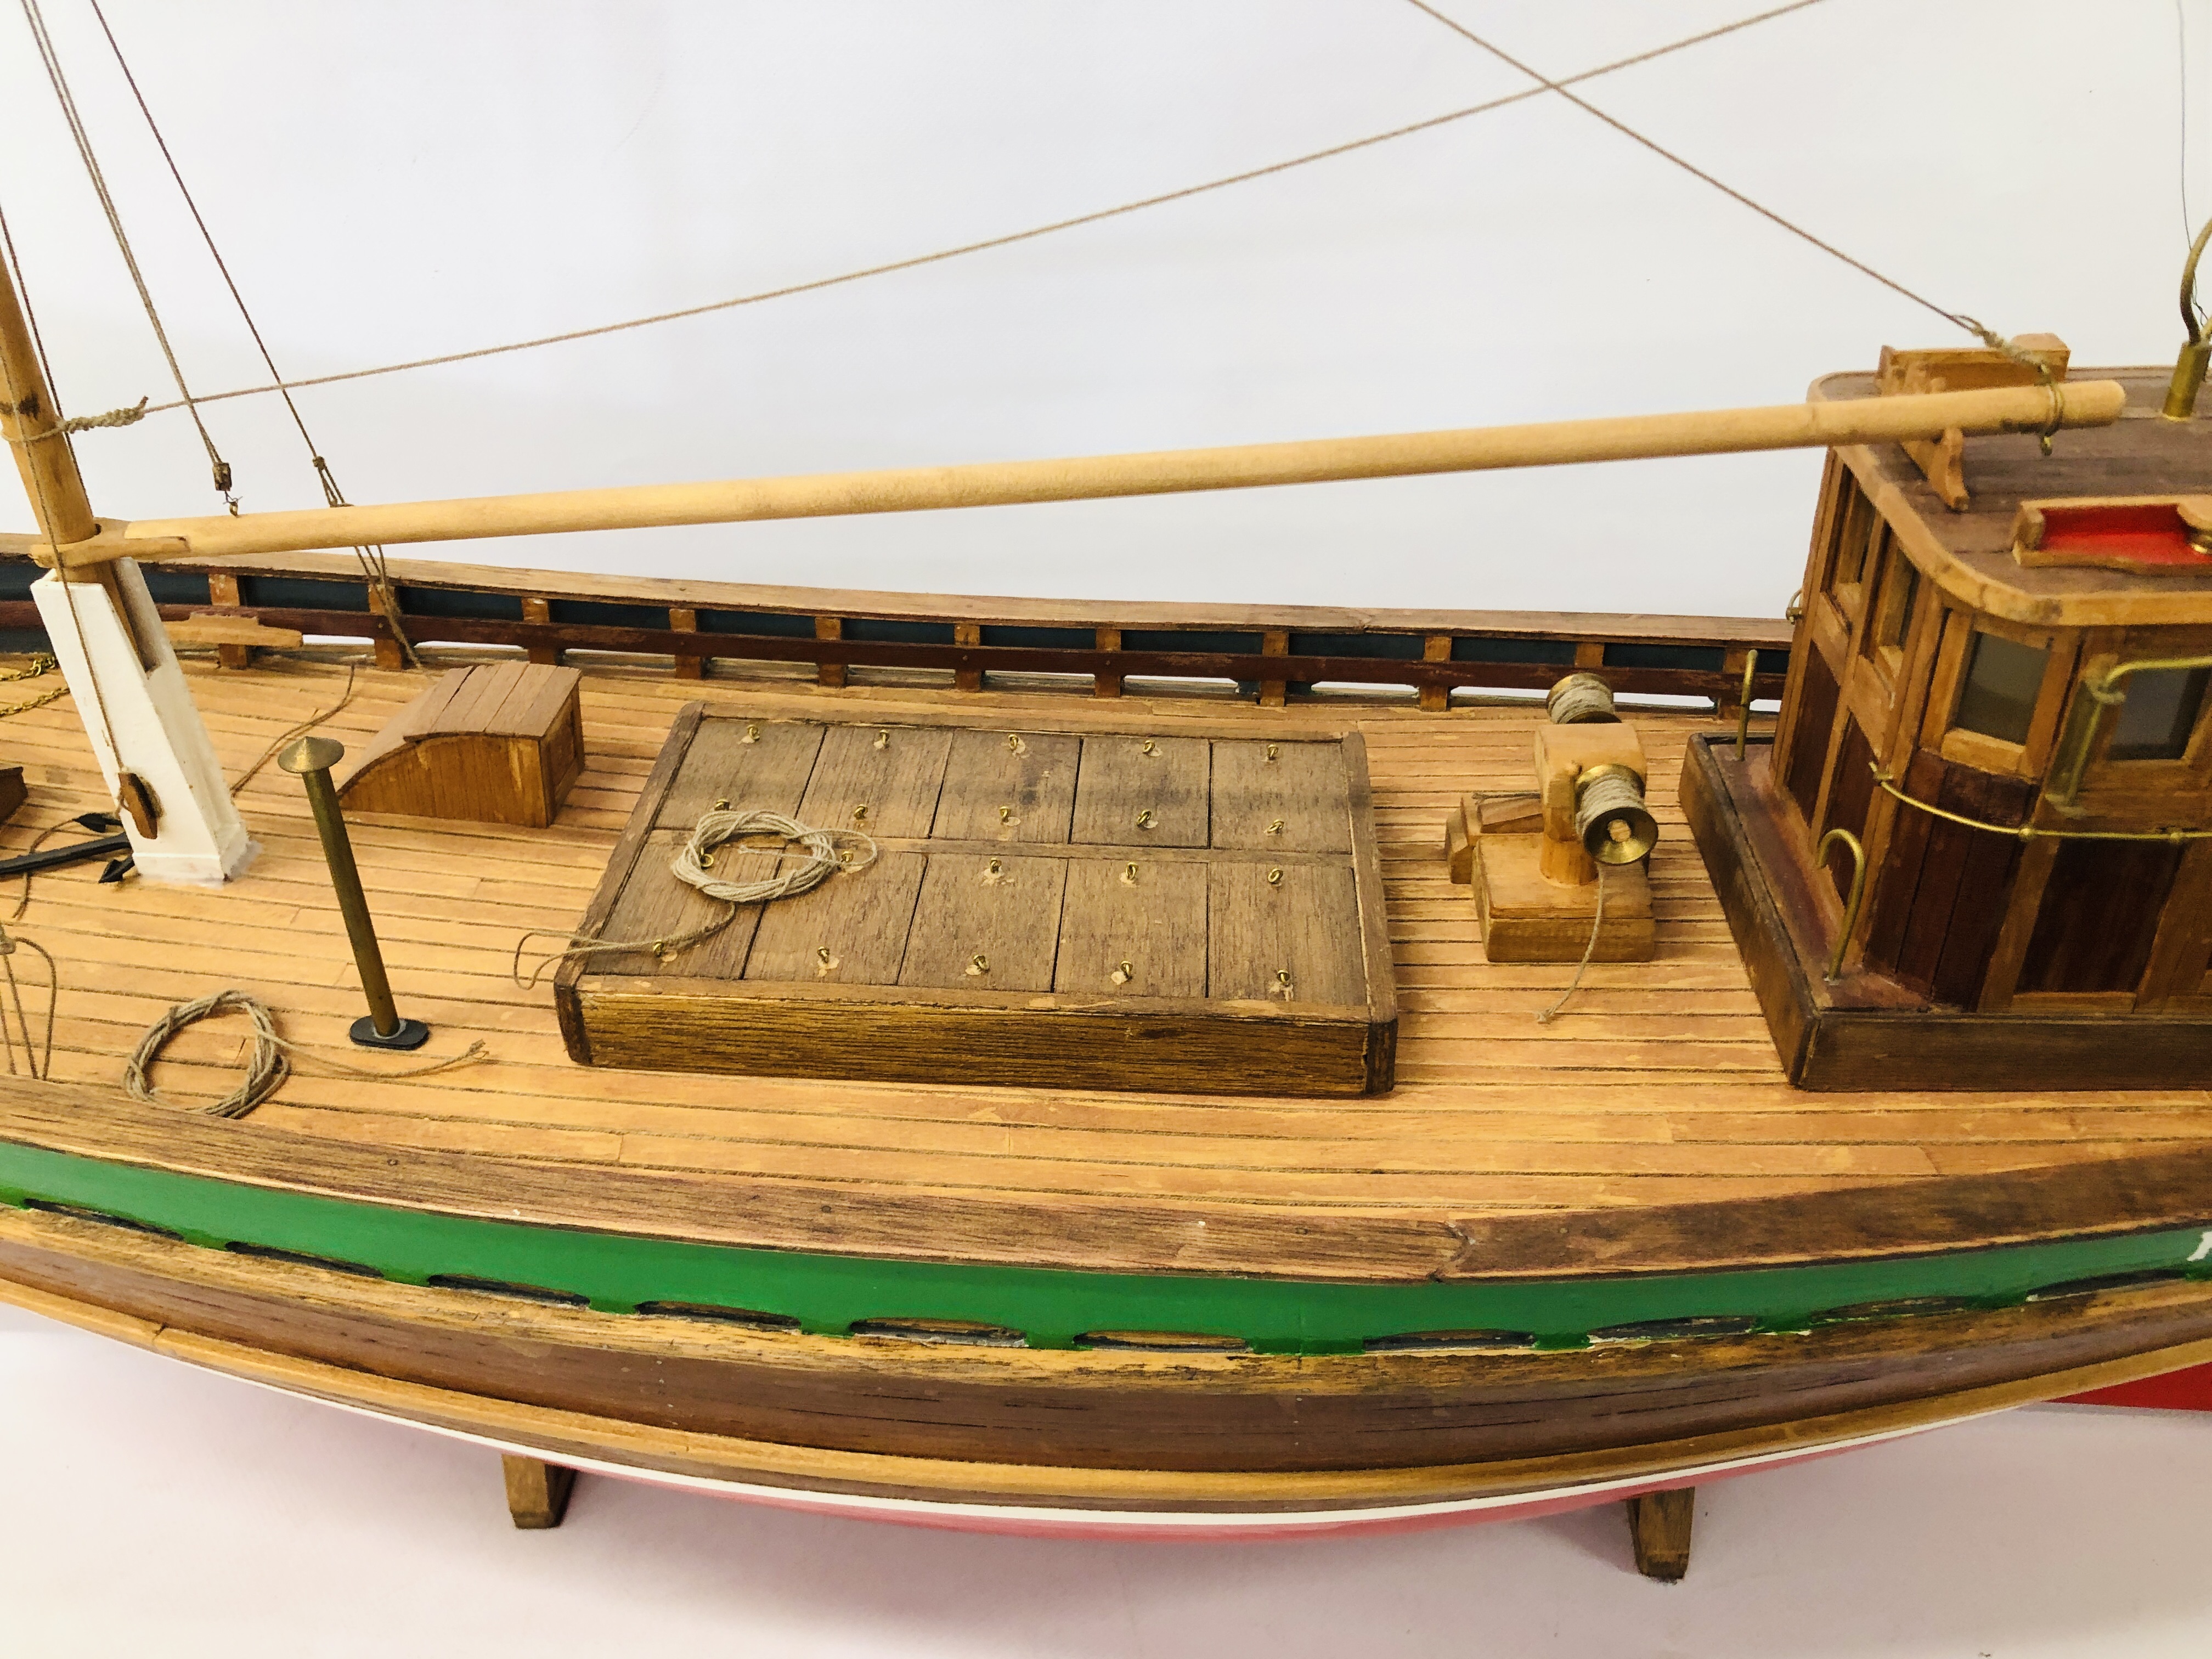 A VINTAGE HAND BUILT WOODEN MODEL OF A FISHING TRAWLER "EILEEN" NO. 96 LENGTH 85CM. HEIGHT 66CM. - Image 5 of 11